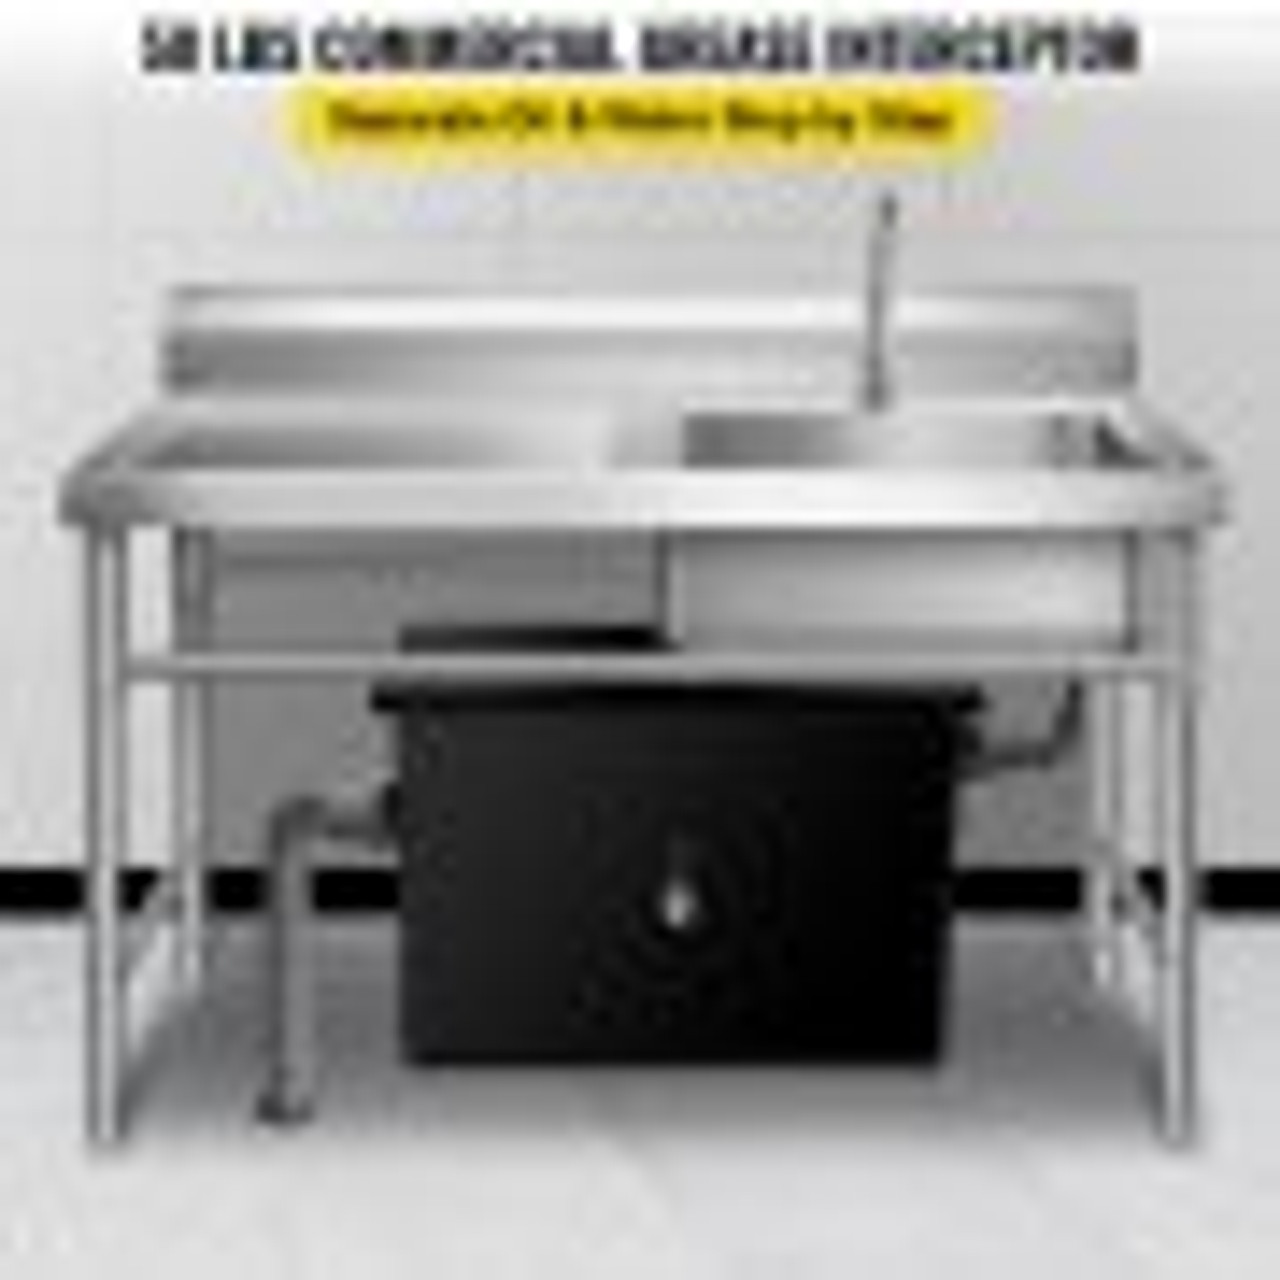 Commercial Grease Interceptor 50 LB, Carbon Steel Grease Trap 25 GPM, Grease Interceptor Trap with Side Water Inlet, Under Sink Grease Trap for Restaurant Canteen Factory Home Kitchen